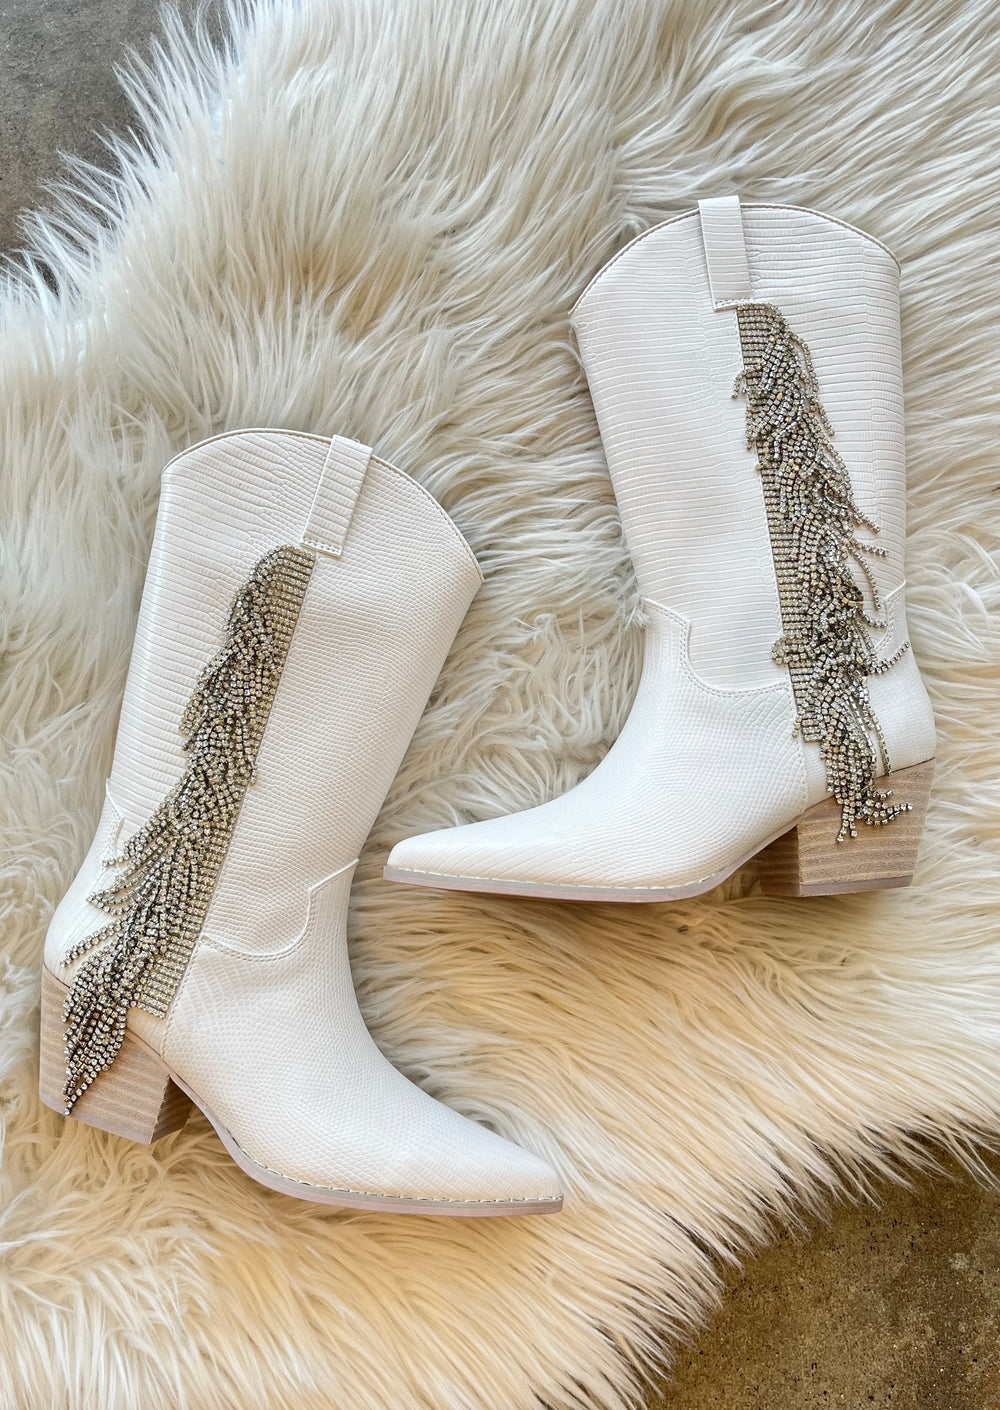 Giselle Boot, Shoes, Adeline, Adeline, dallas boutique, dallas texas, texas boutique, women's boutique dallas, adeline boutique, dallas boutique, trendy boutique, affordable boutique